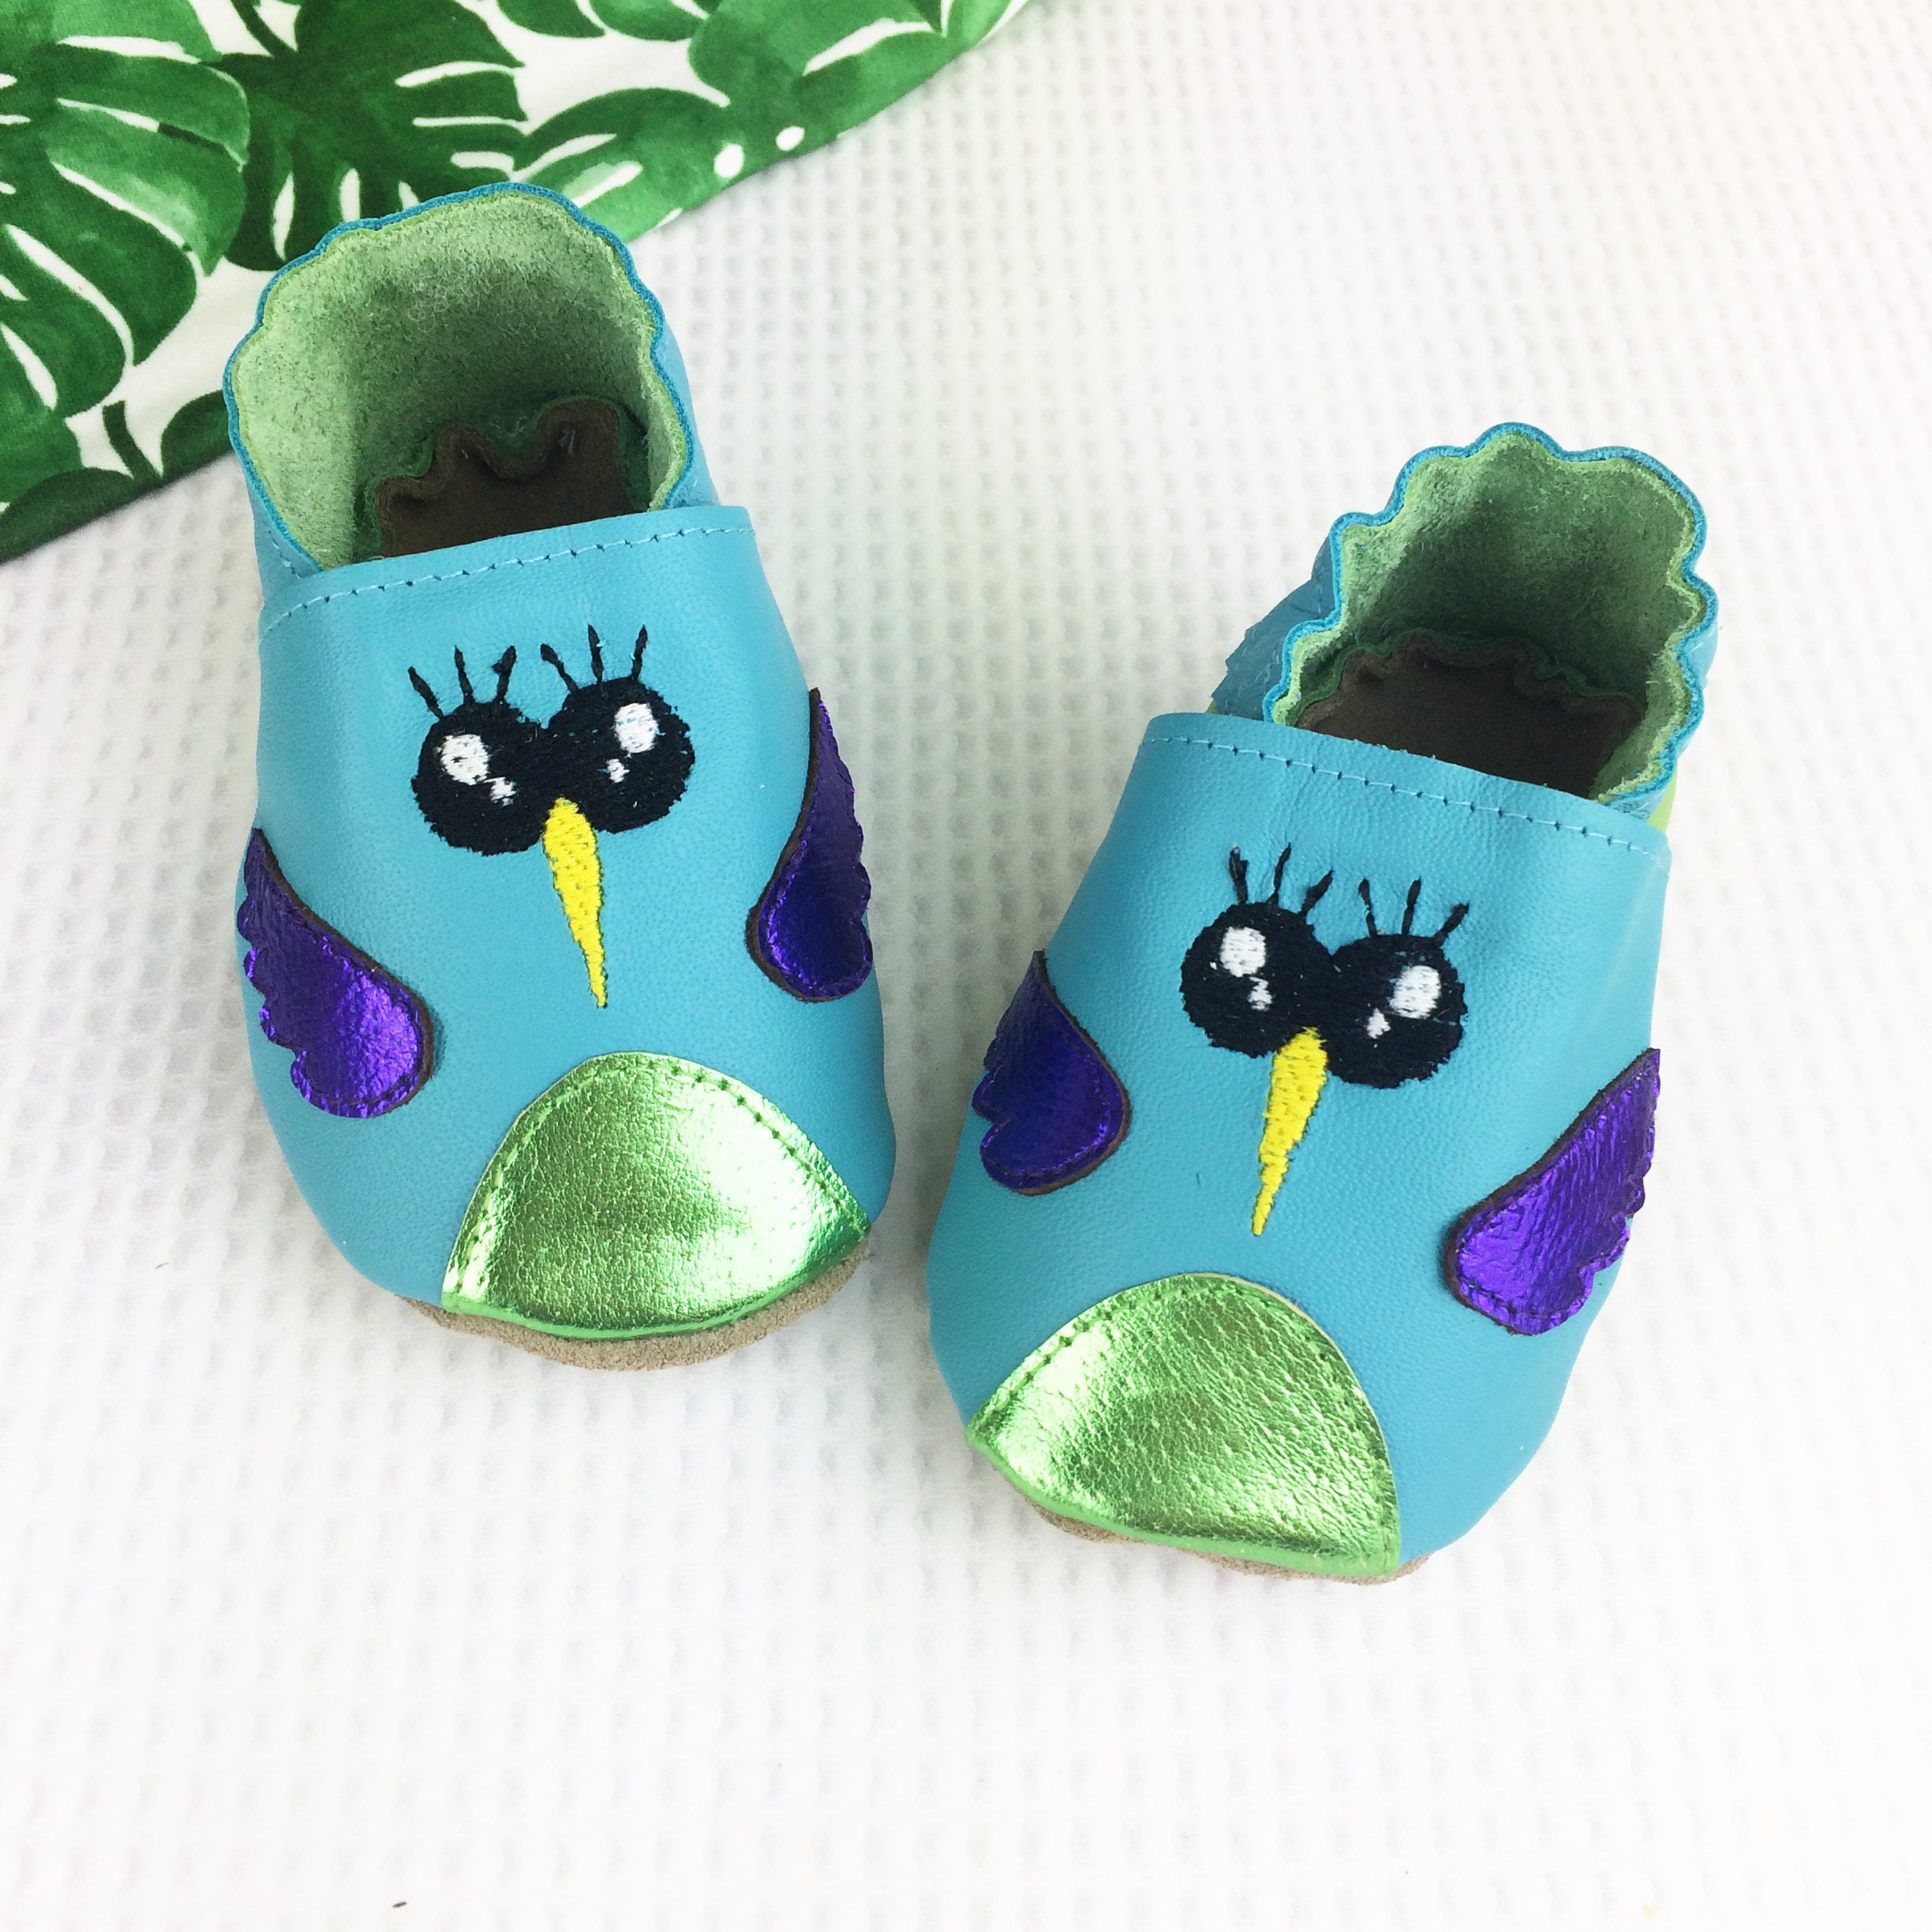 turquoise baby shoes